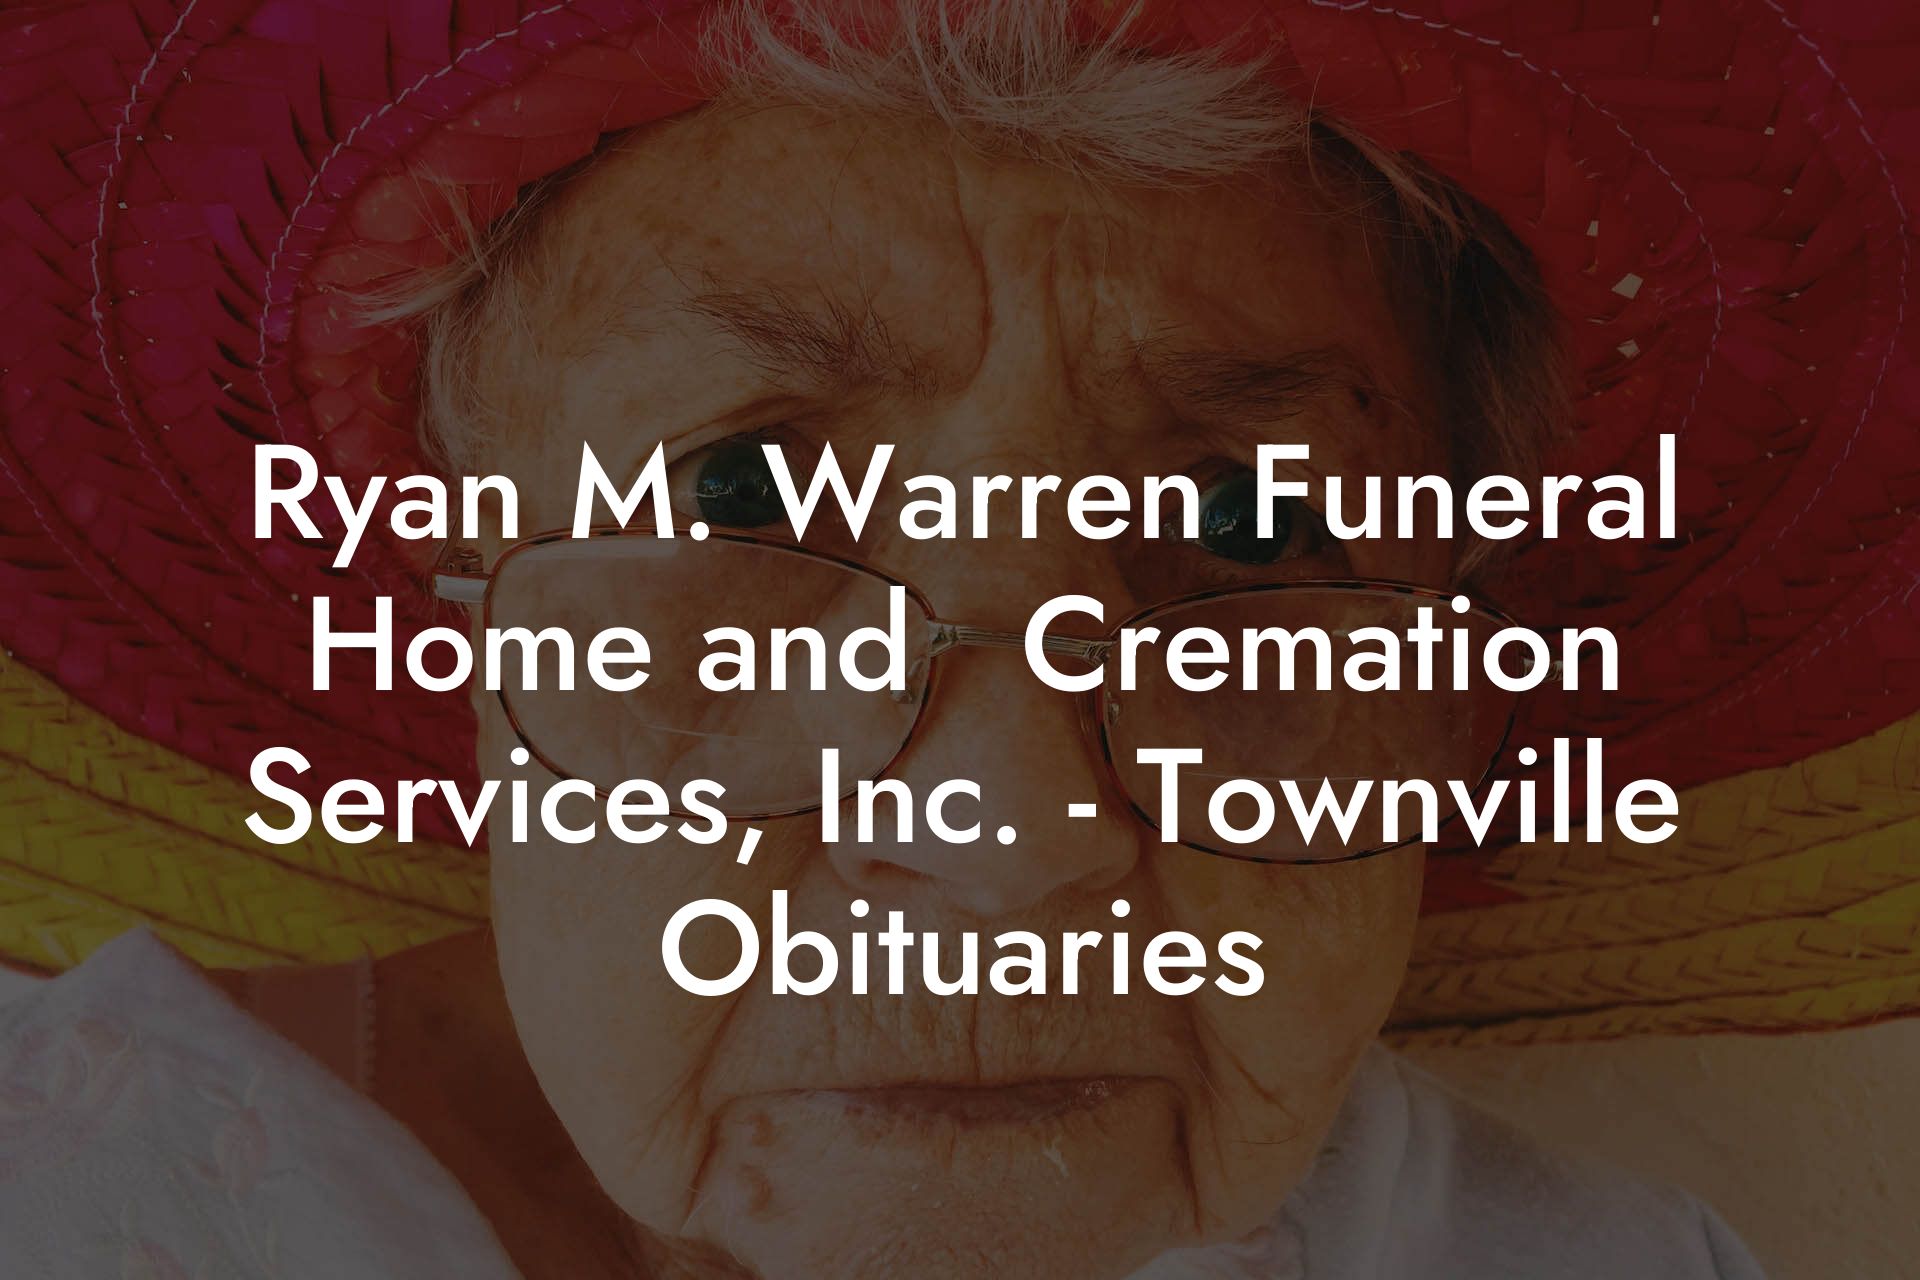 Ryan M. Warren Funeral Home and ﻿Cremation Services, Inc. - Townville Obituaries